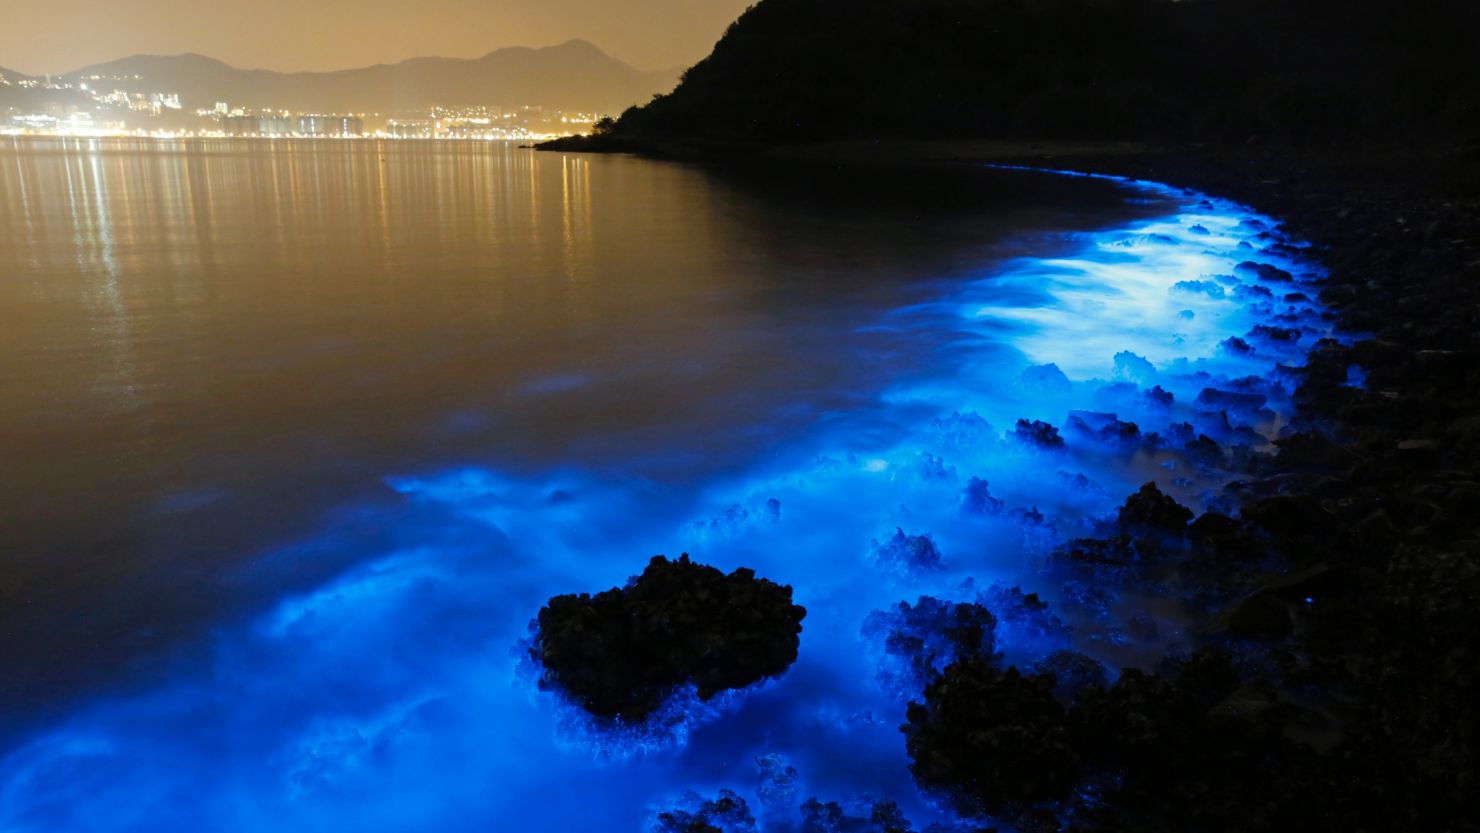 A long exposure photo from January 22, 2015 shows the glow from a Noctiluca scintillans algal bloom along the seashore in Hong Kong.